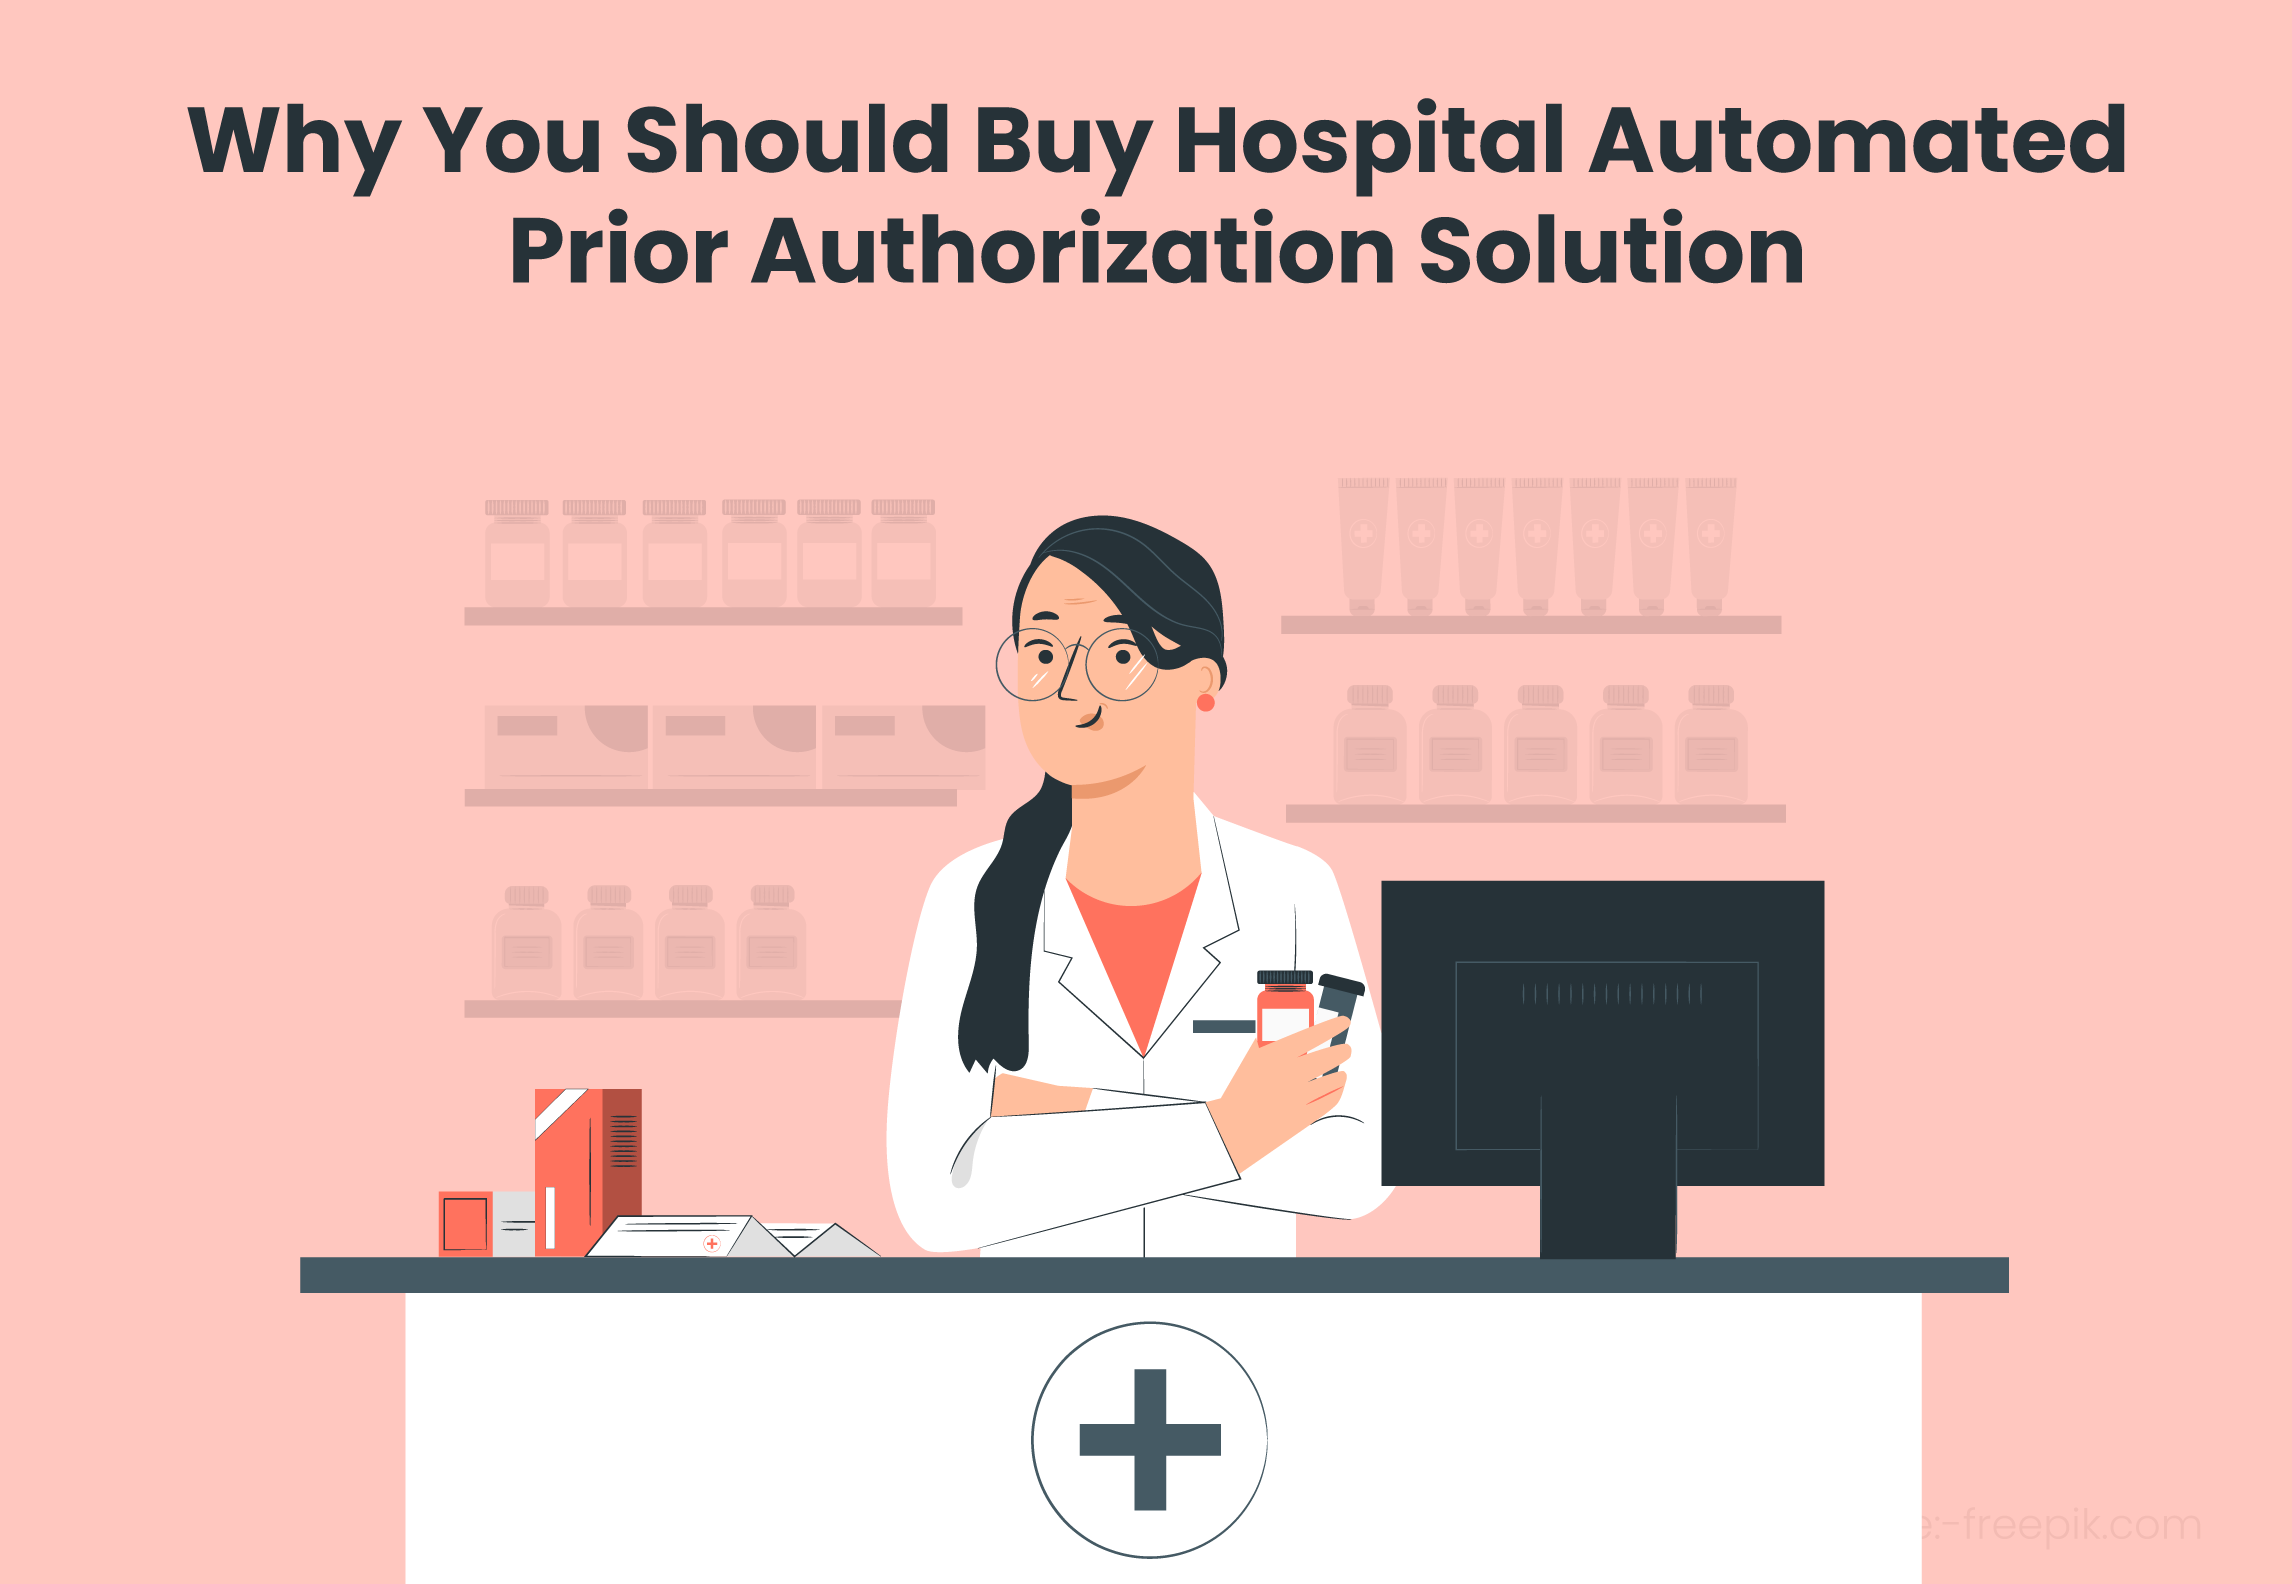 Why You Should Buy Hospital Automated Prior Authorization Solution